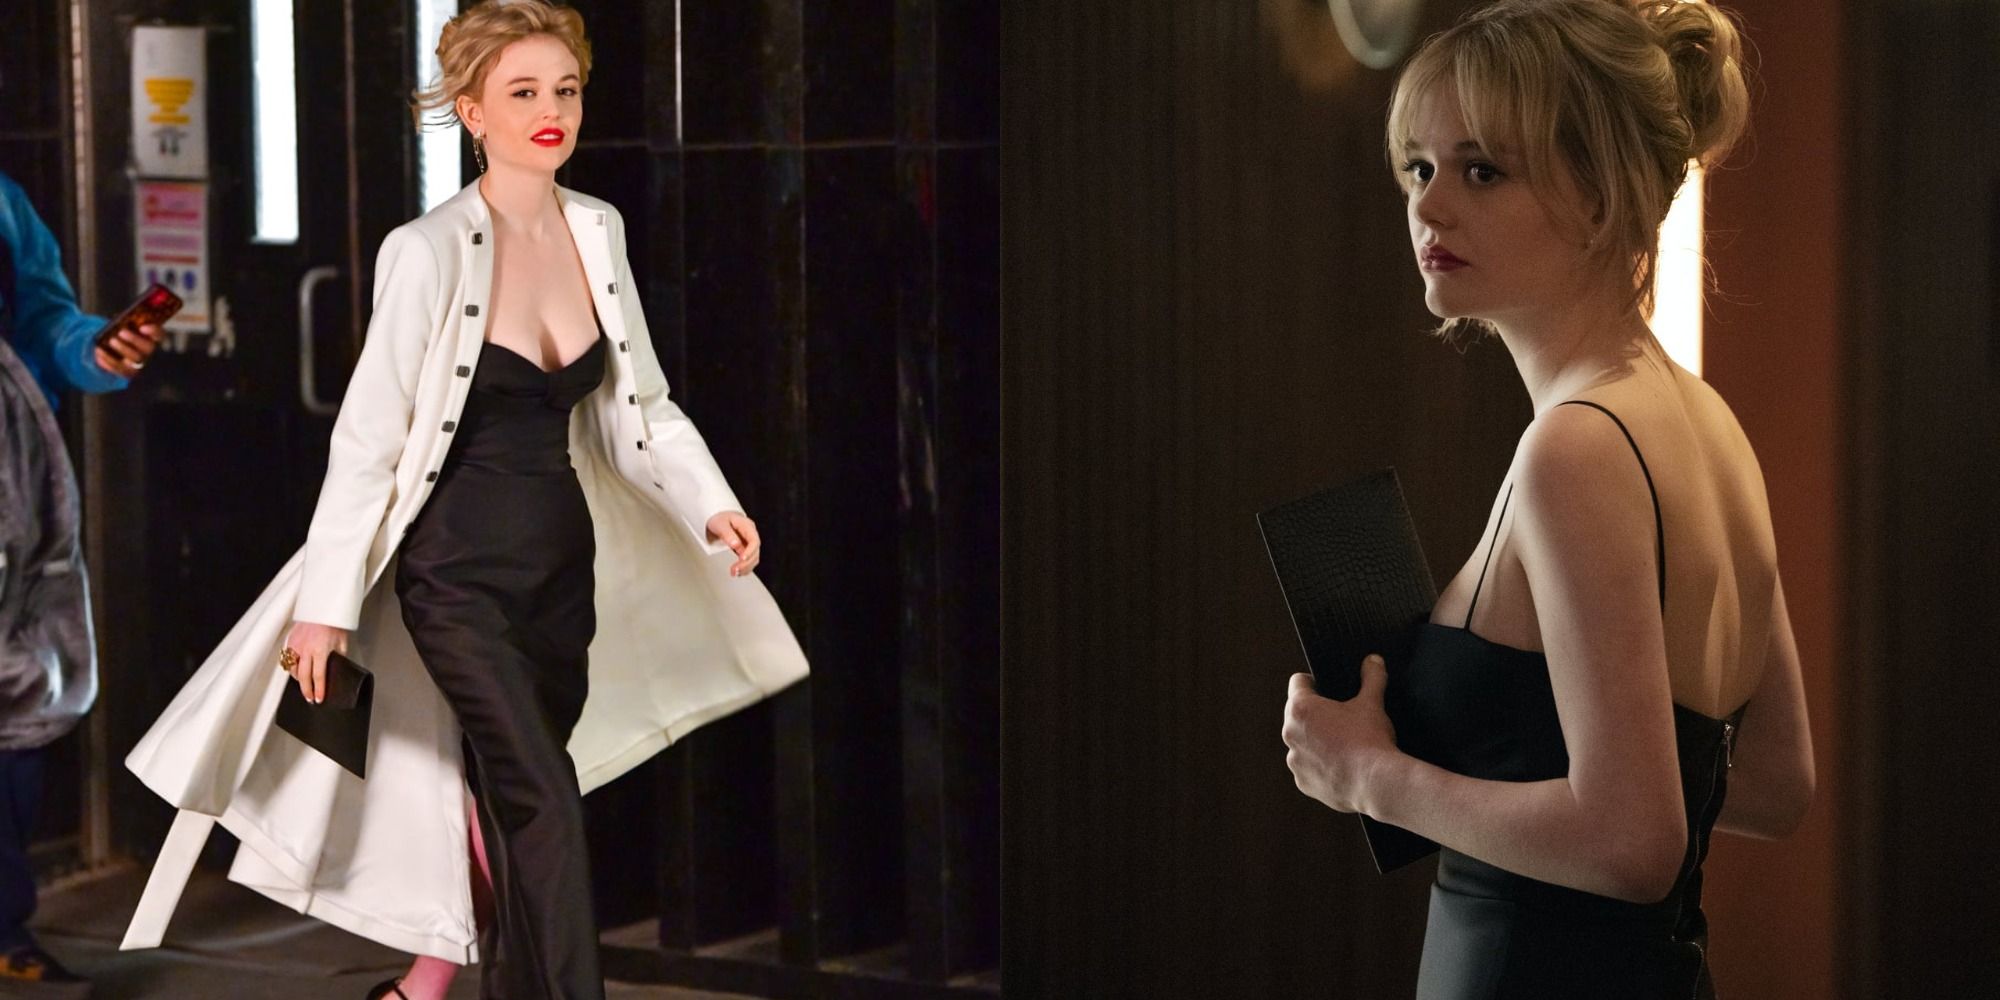 Two images of Audrey walking out of a building, and Audrey looking over her shoulder in Gossip Girl.